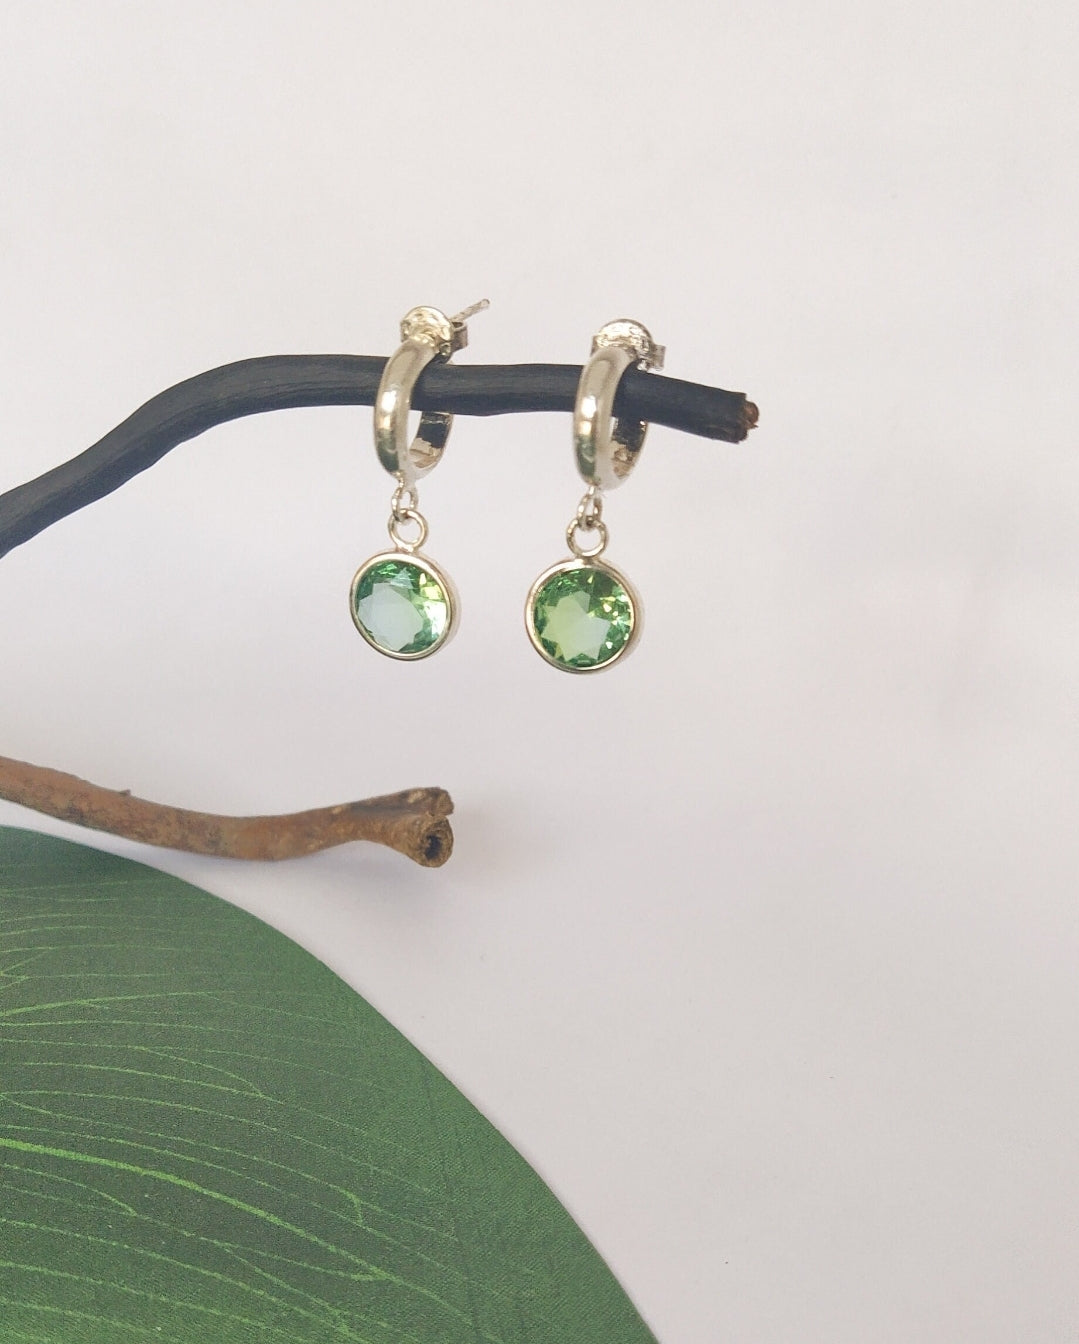 Gold Green Crystal Earrings. For special occasions. Flourish Collection. Handmade by Ariadna Echenique. Gold plated